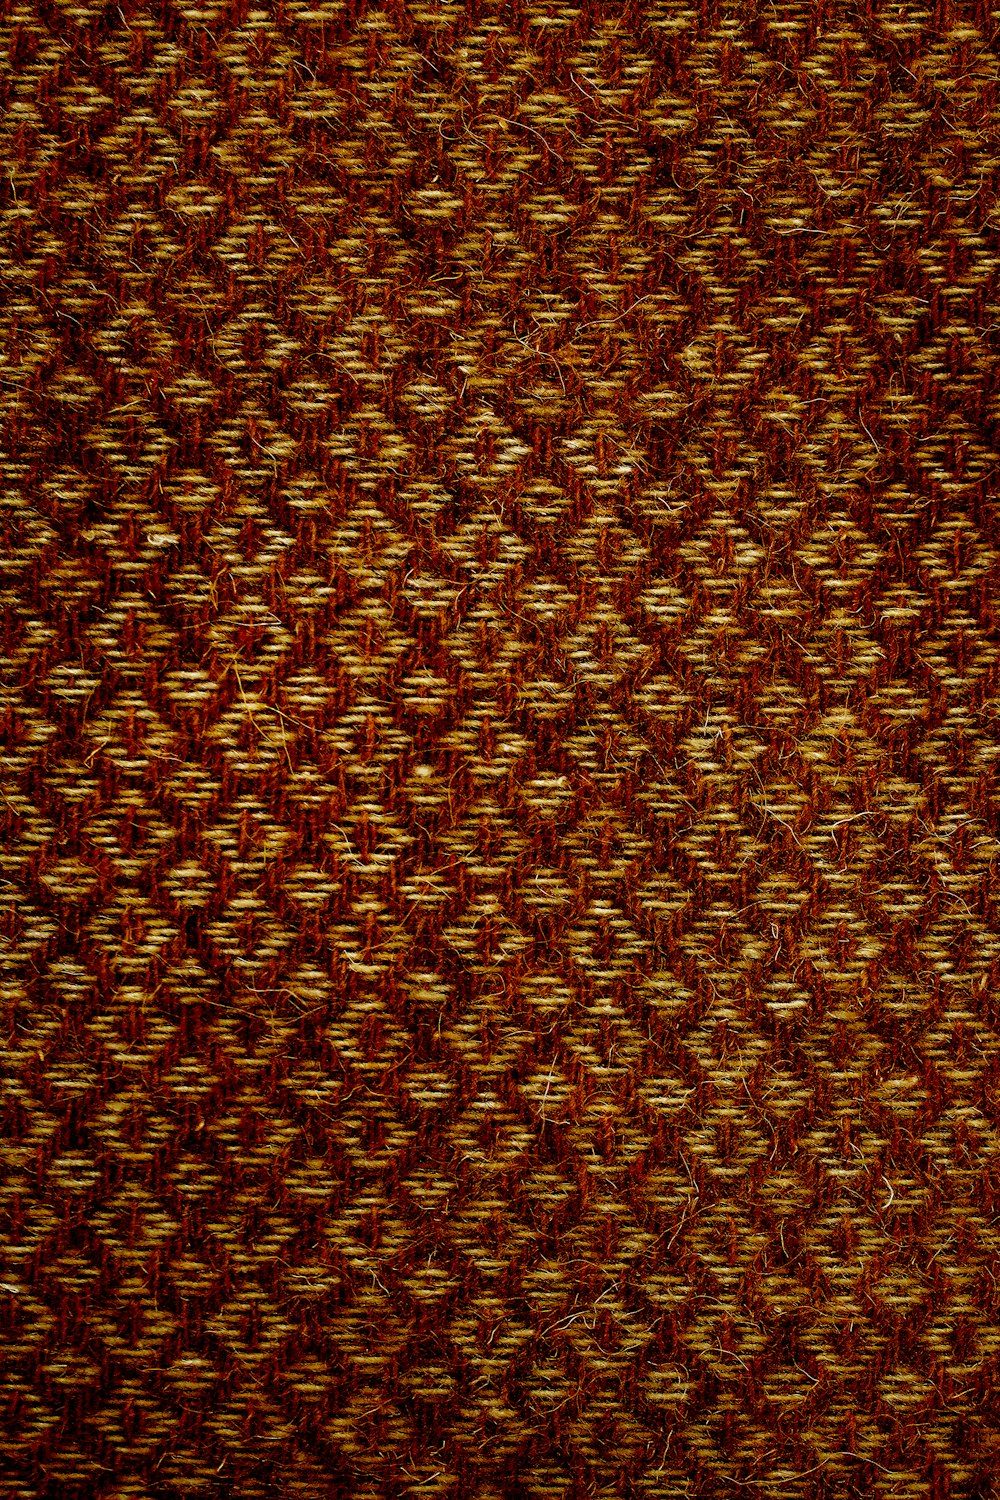 brown and black textile in close up photography